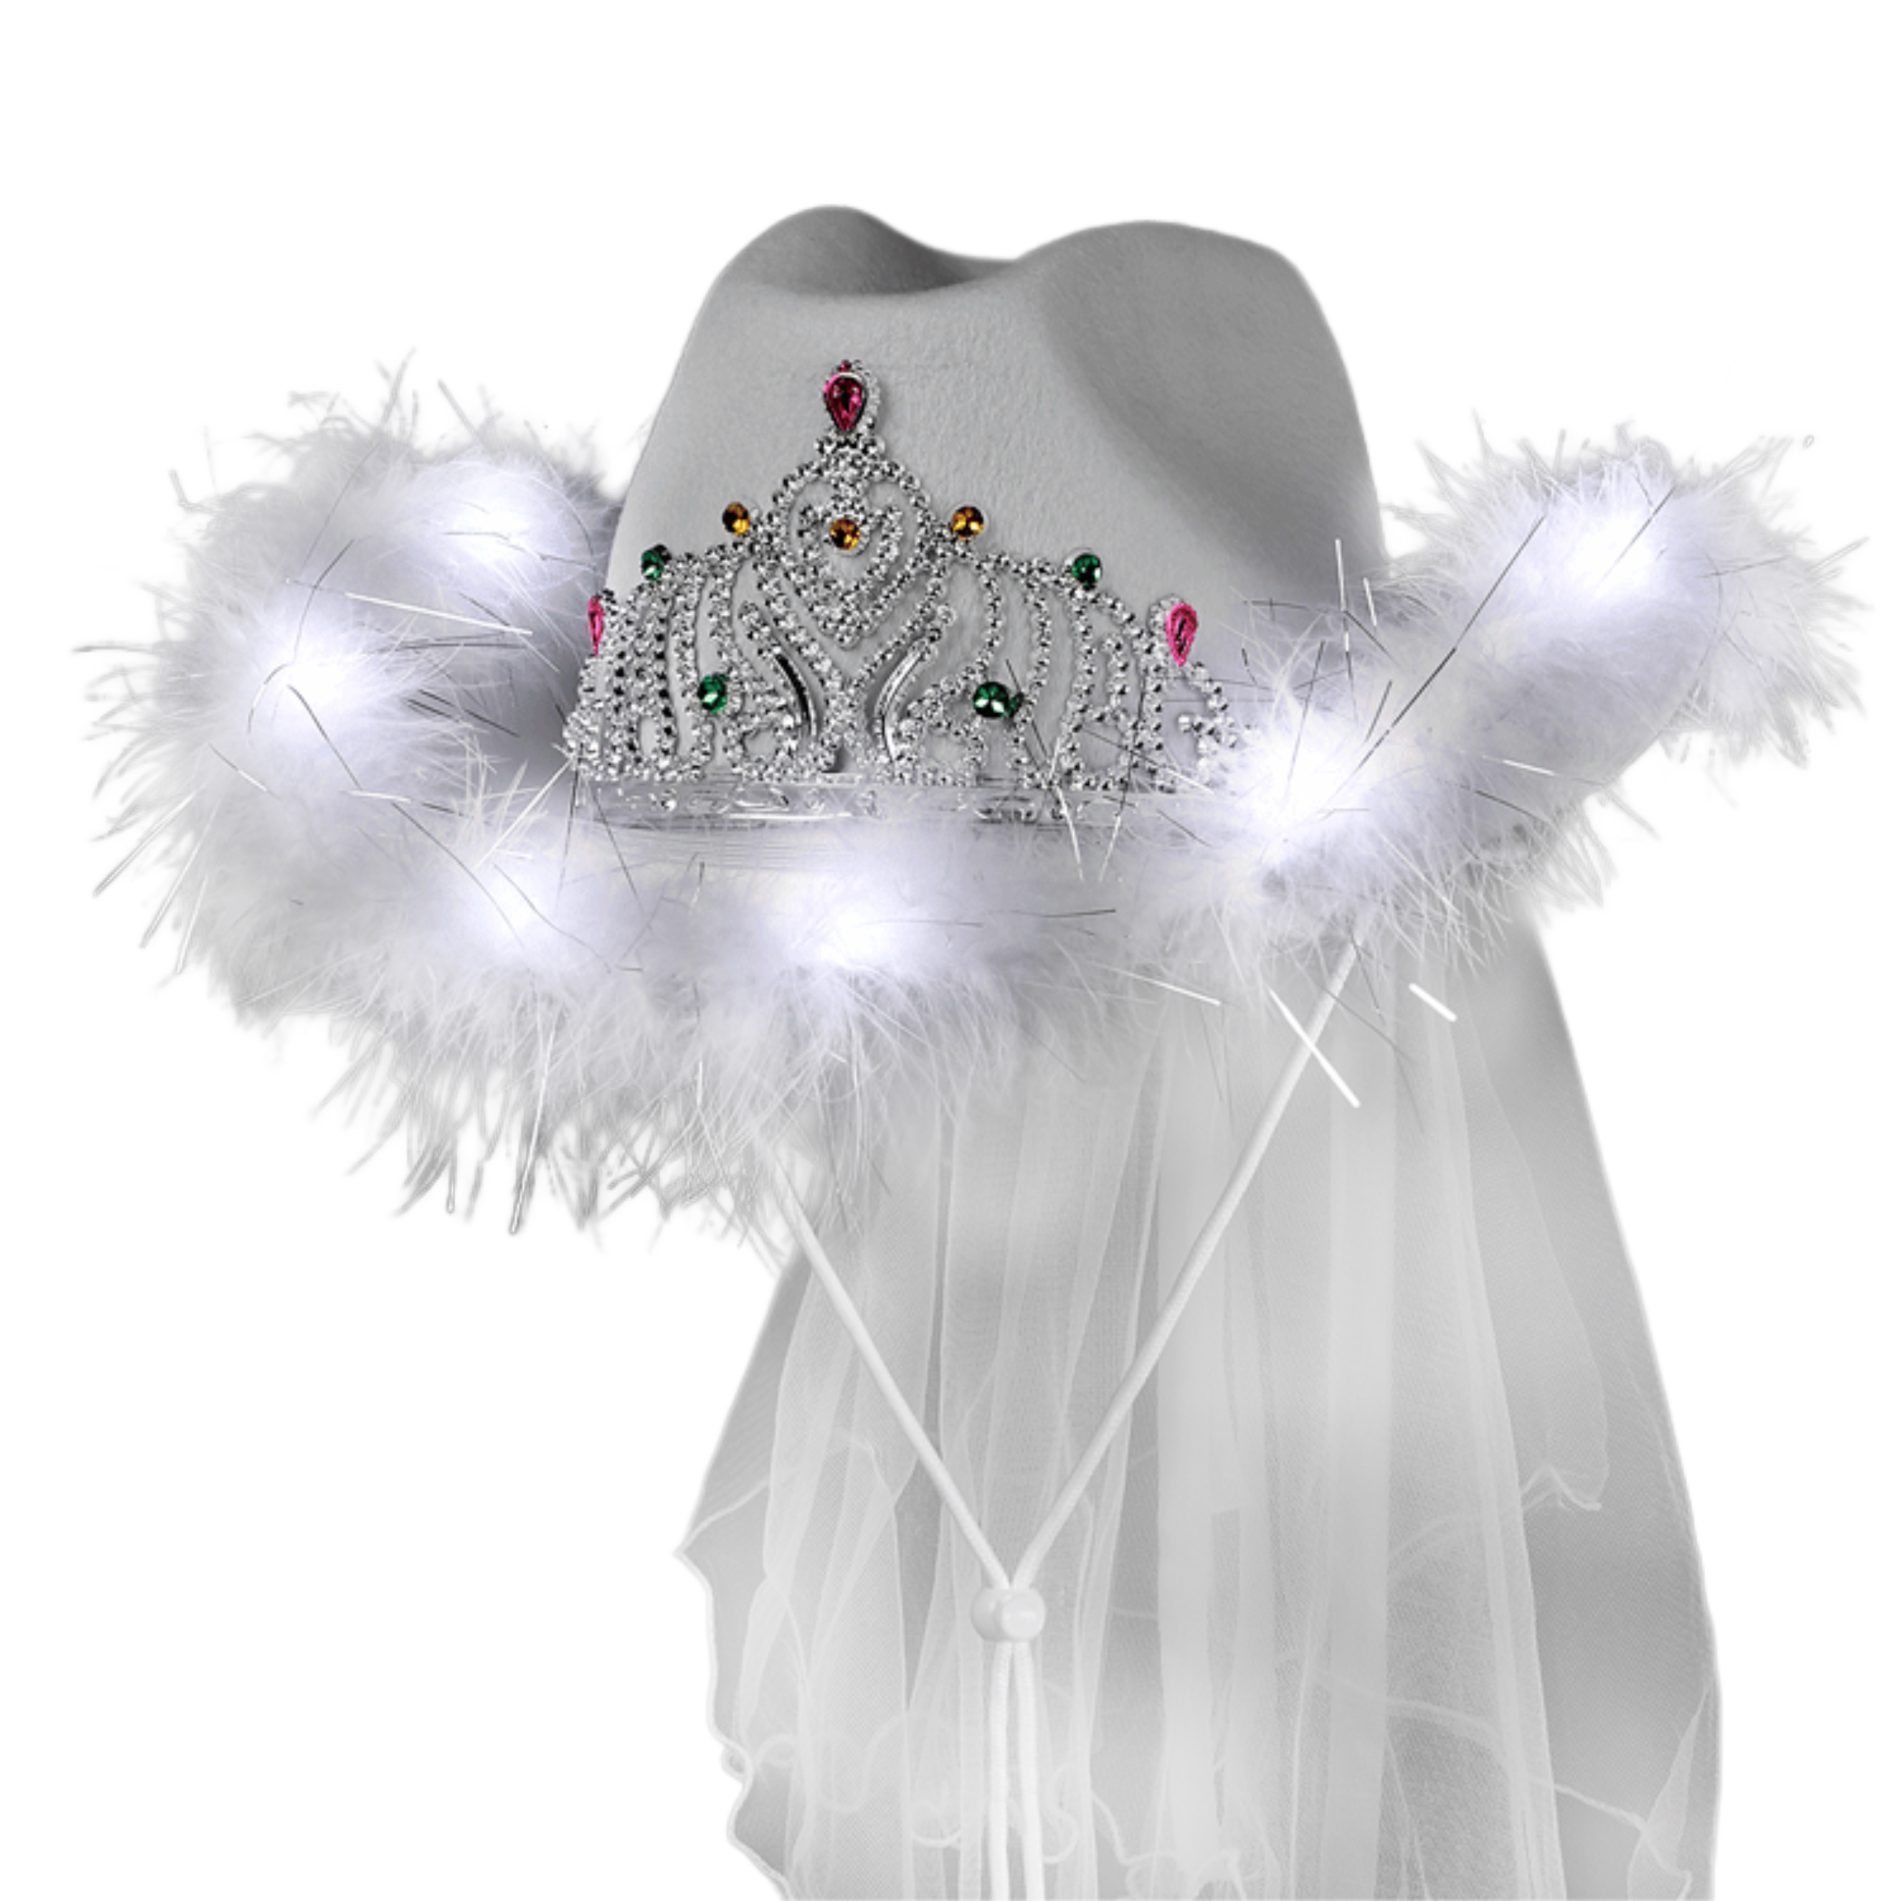 Light Up White Tiara Bridal Cowboy Cowgirl Hat with Veil for Bachelorette and Bridal Party All Products 3